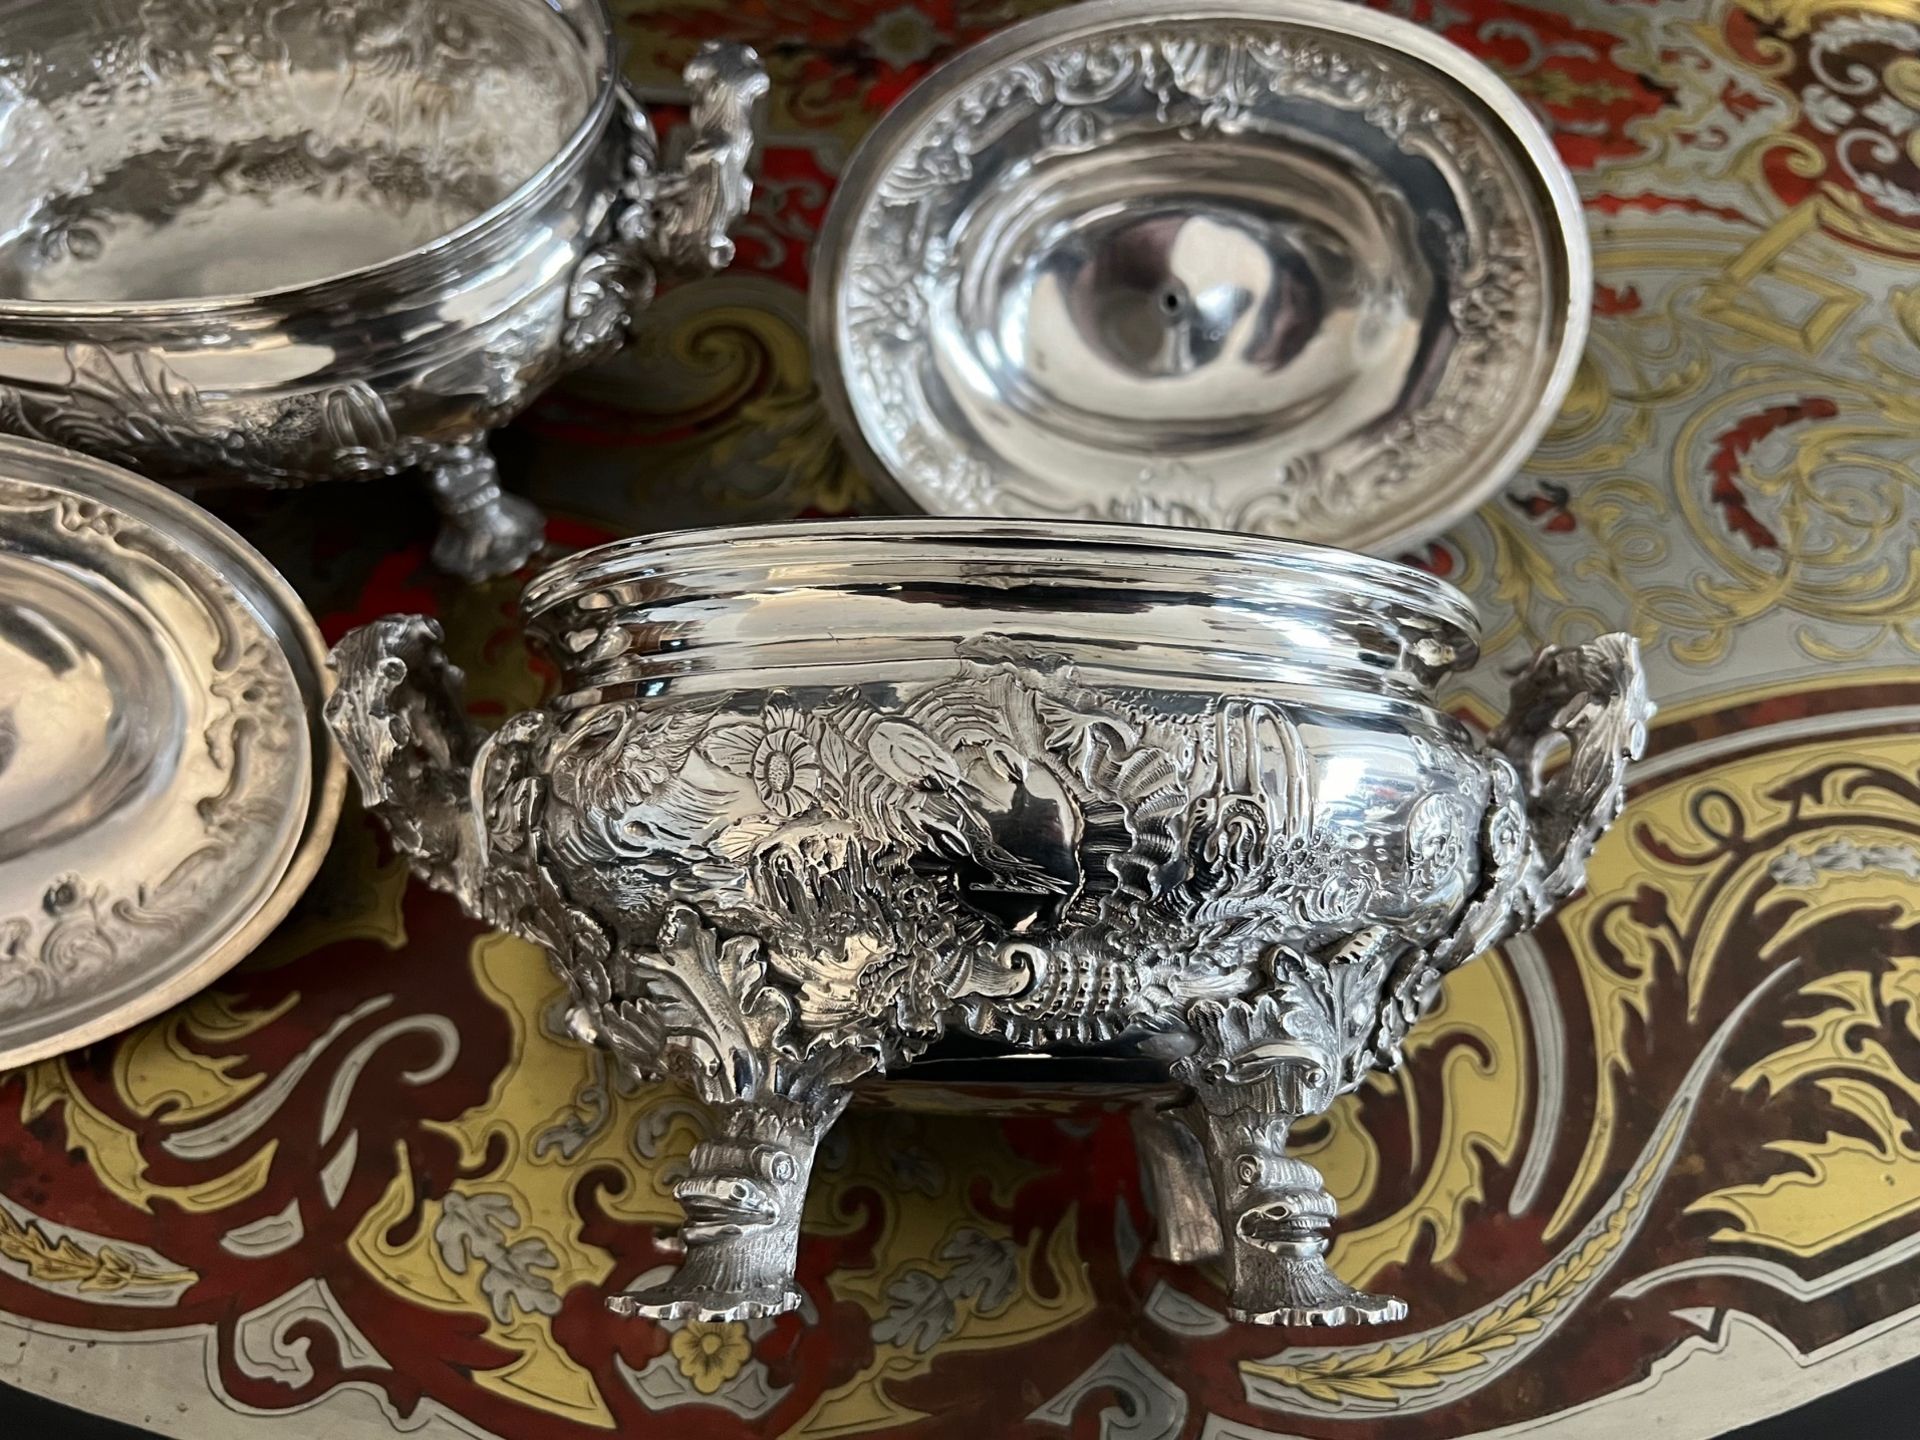 A FINE PAIR OF 18TH CENTURY STERLING SILVER SAUCE TUREENS, LONDON, 1790, WILLIAM PITTS - Image 8 of 19